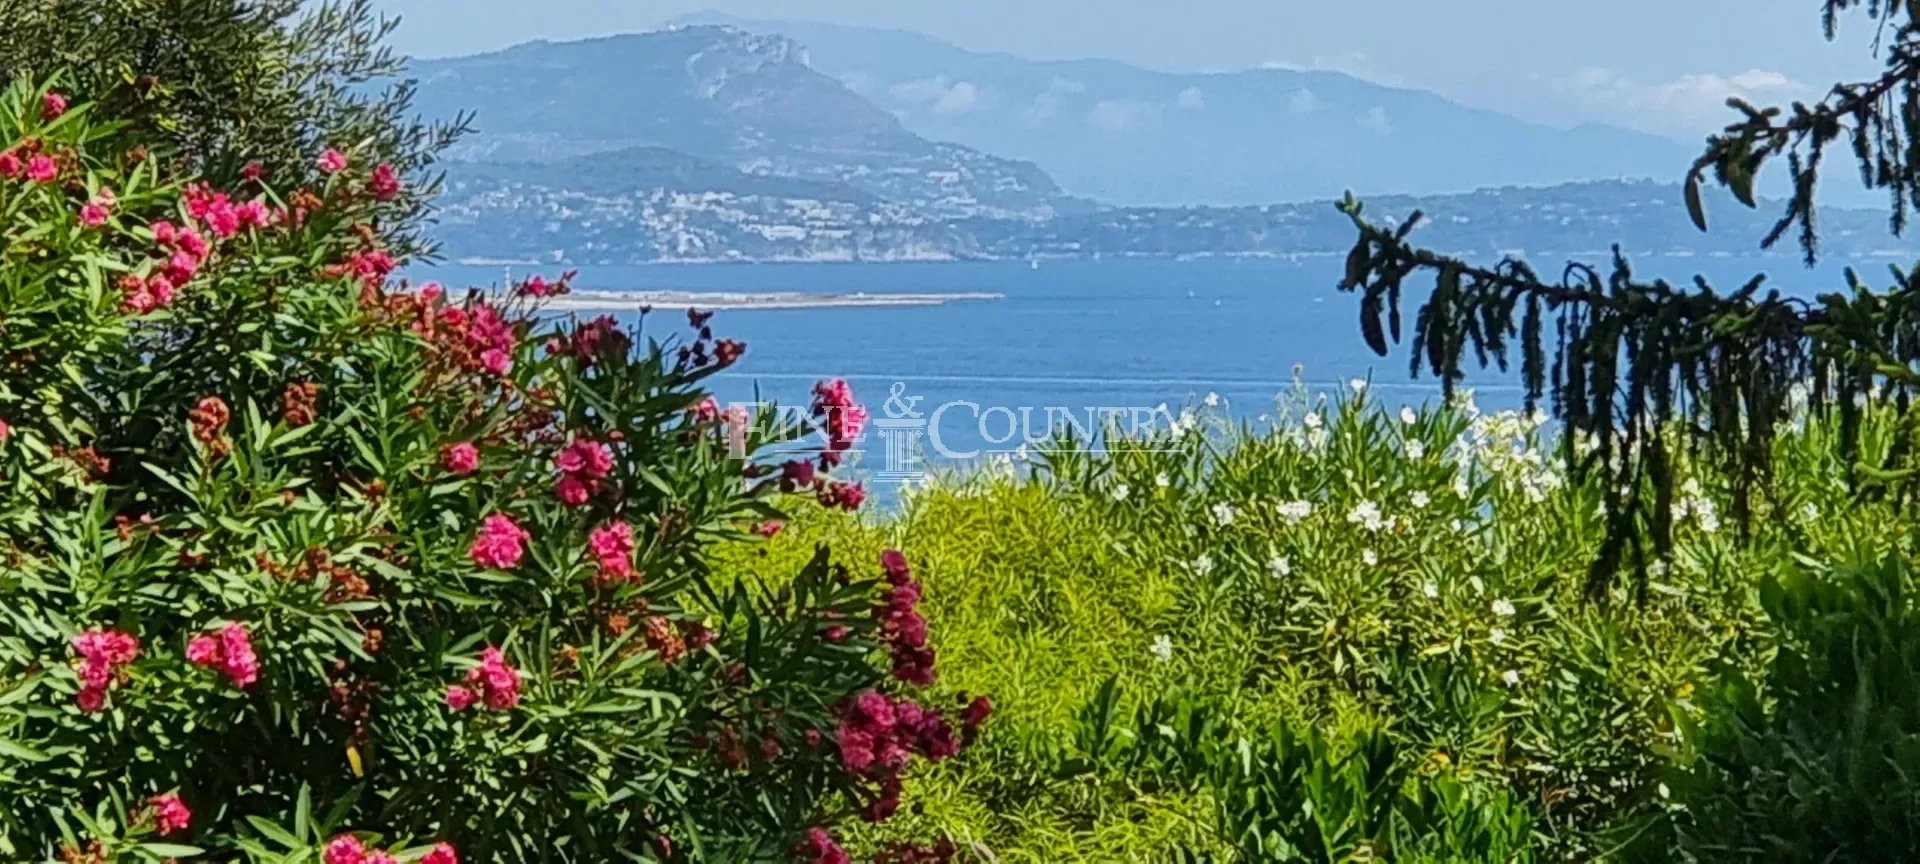 Bastide For Sale in Antibes